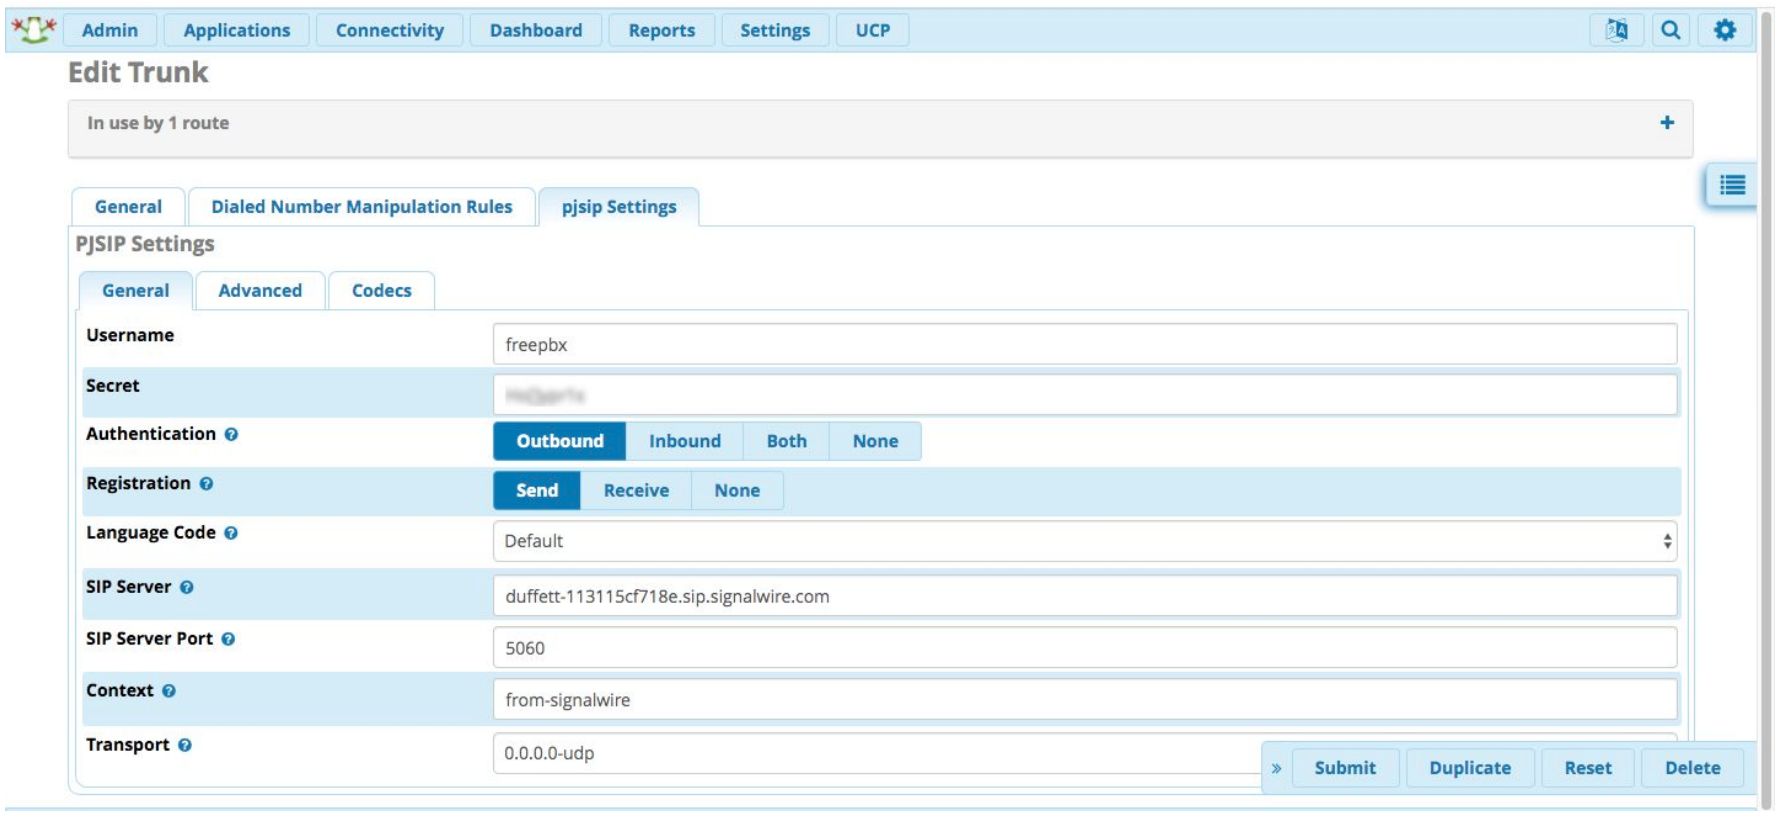 A screenshot of the PJSIP Settings tab of the Edit Trunk page in Asterisk. User name is set to freepbx. Authentication is set to Outbound. Registration is set to Send. Language Code is set to Default. The SIP Server is set to the desired space URI. SIP Server Port is set to 5060. Context is set to 'from-signalwire'. Transport is set to '0.0.0.0-udp'.